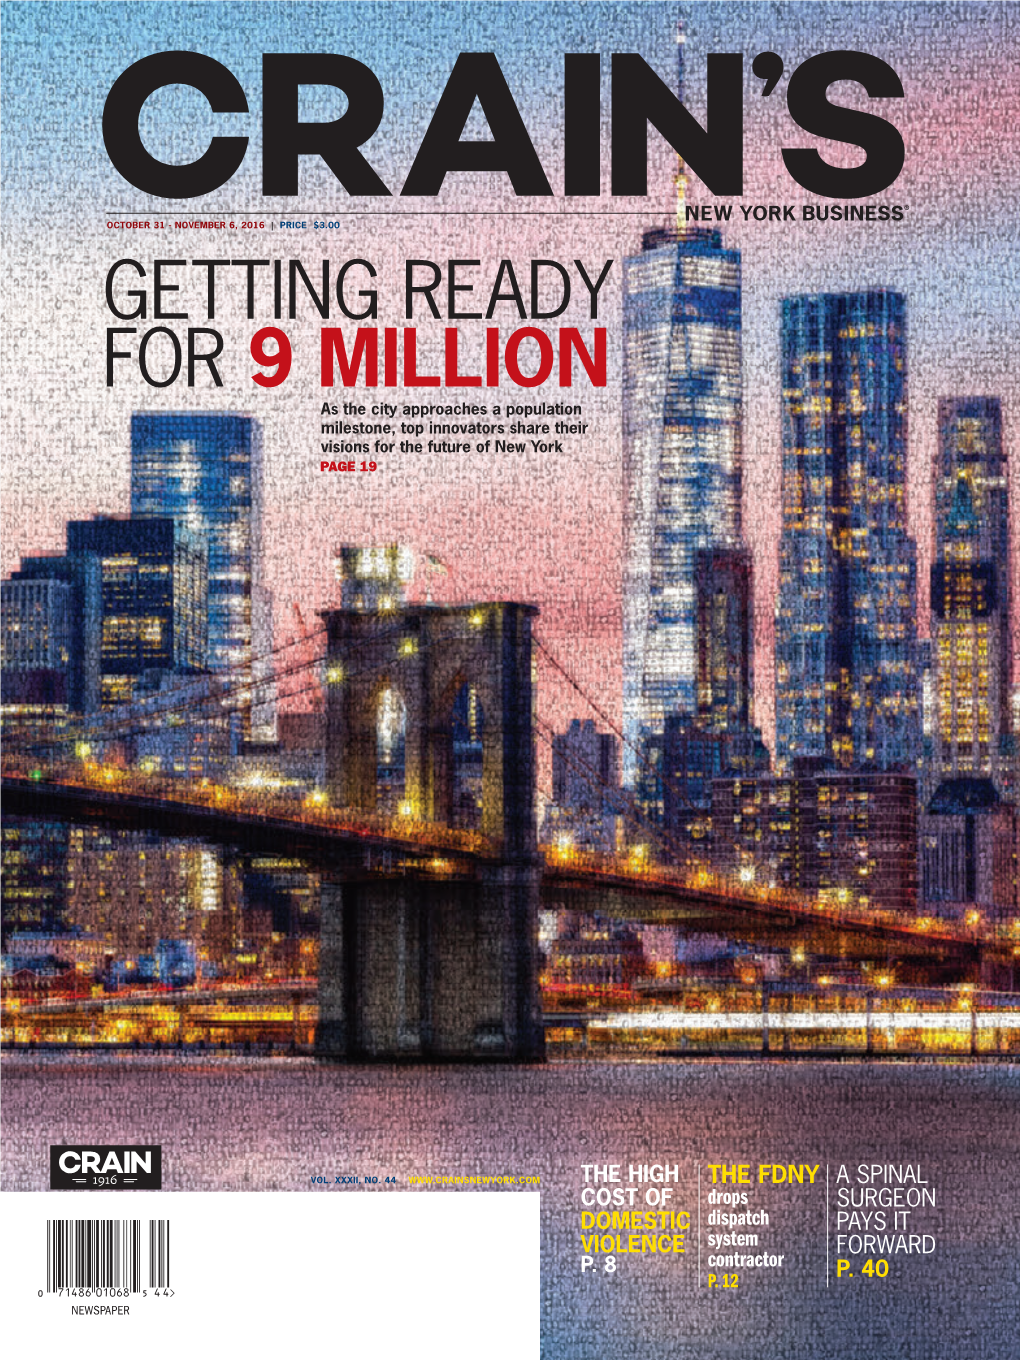 GETTING READY for 9 MILLION As the City Approaches a Population Milestone, Top Innovators Share Their Visions for the Future of New York PAGE 19